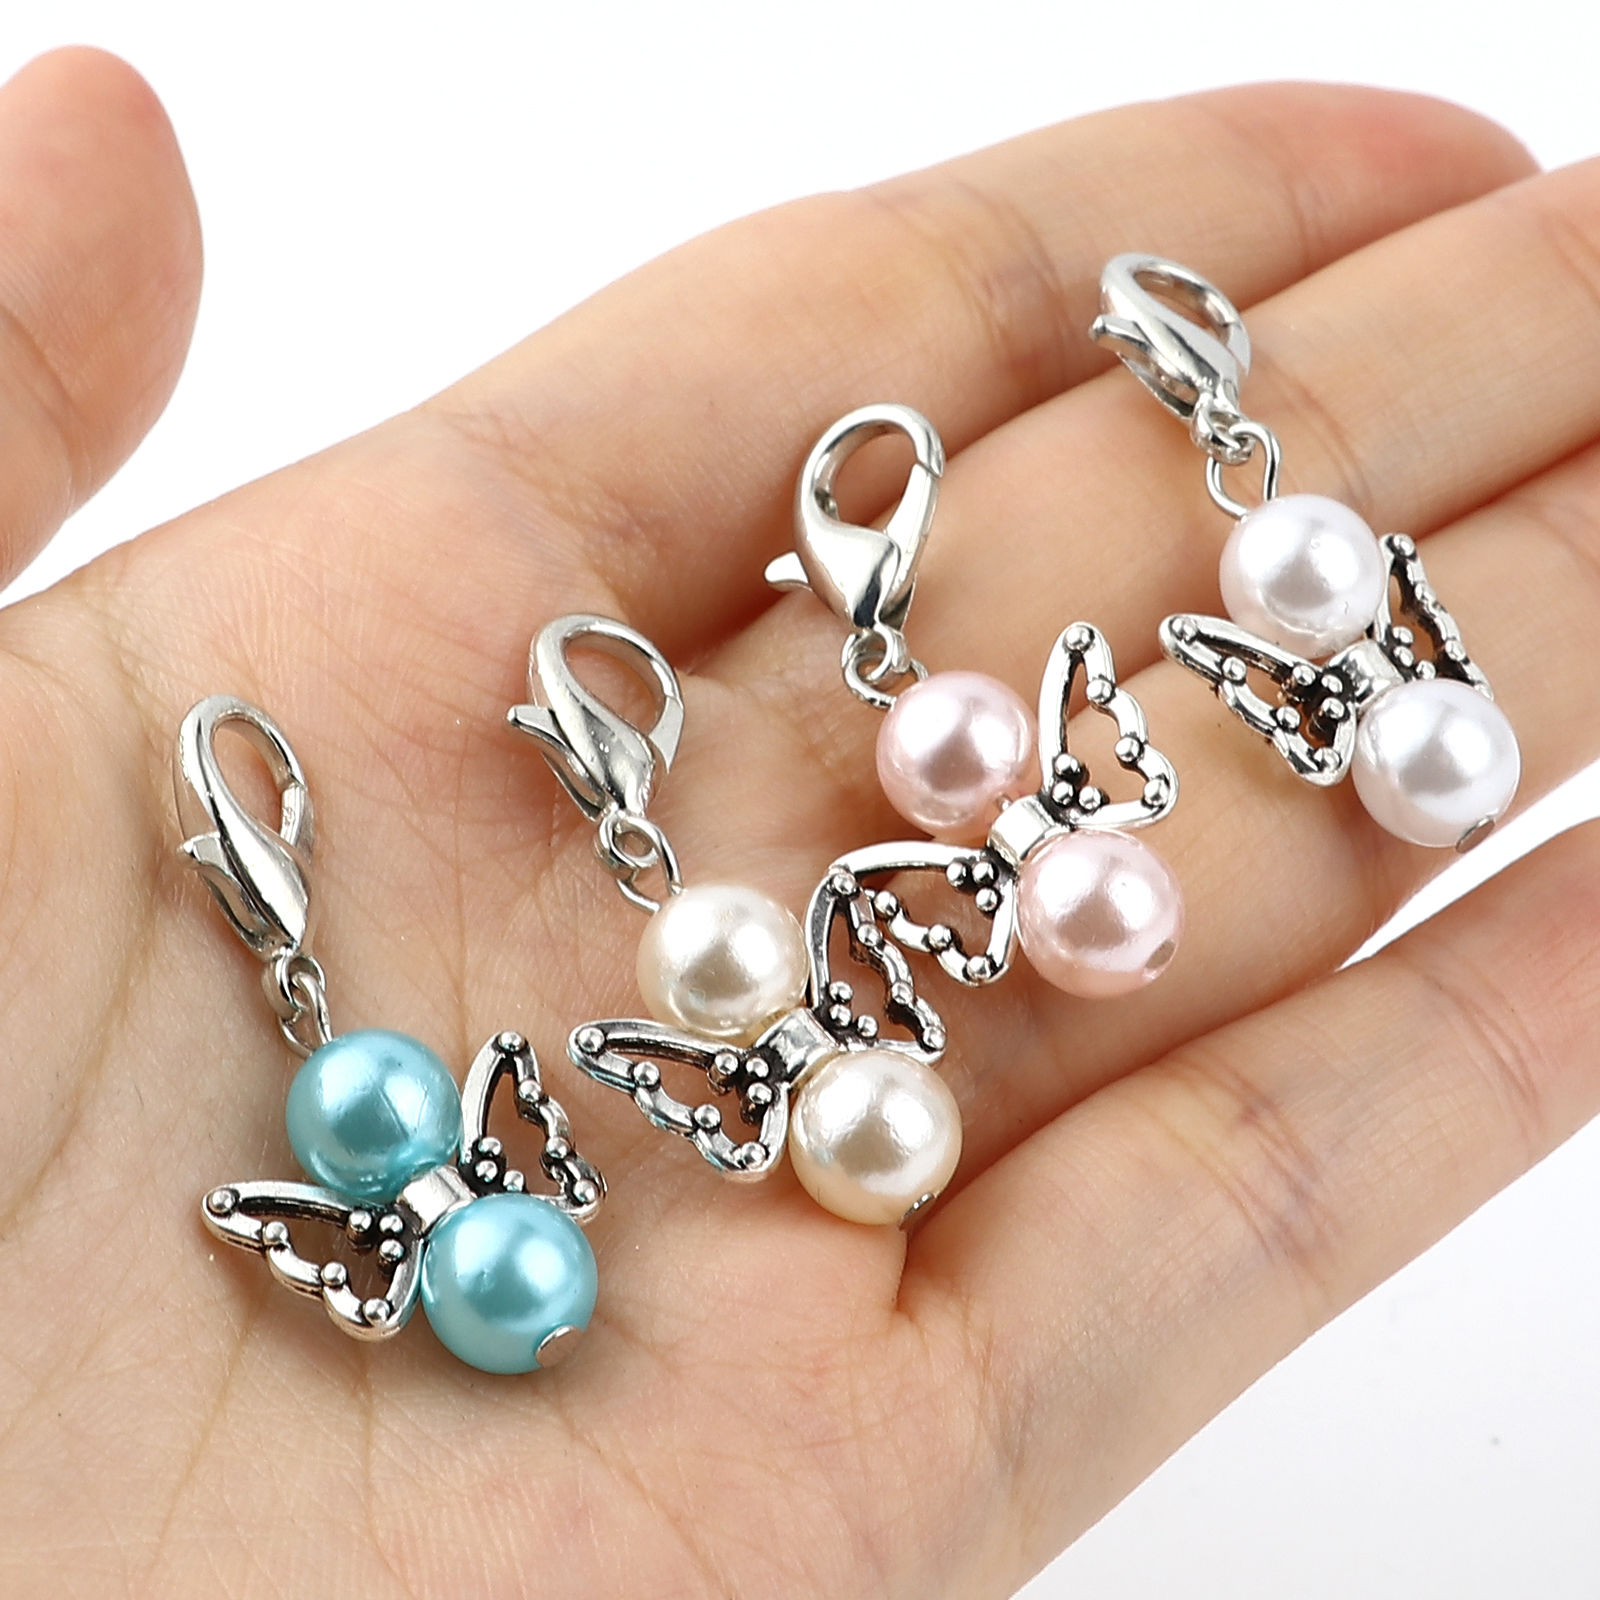 Picture of Zinc Based Alloy Insect Knitting Stitch Markers Angel Antique Silver Color White 38mm x 18mm, 5 PCs